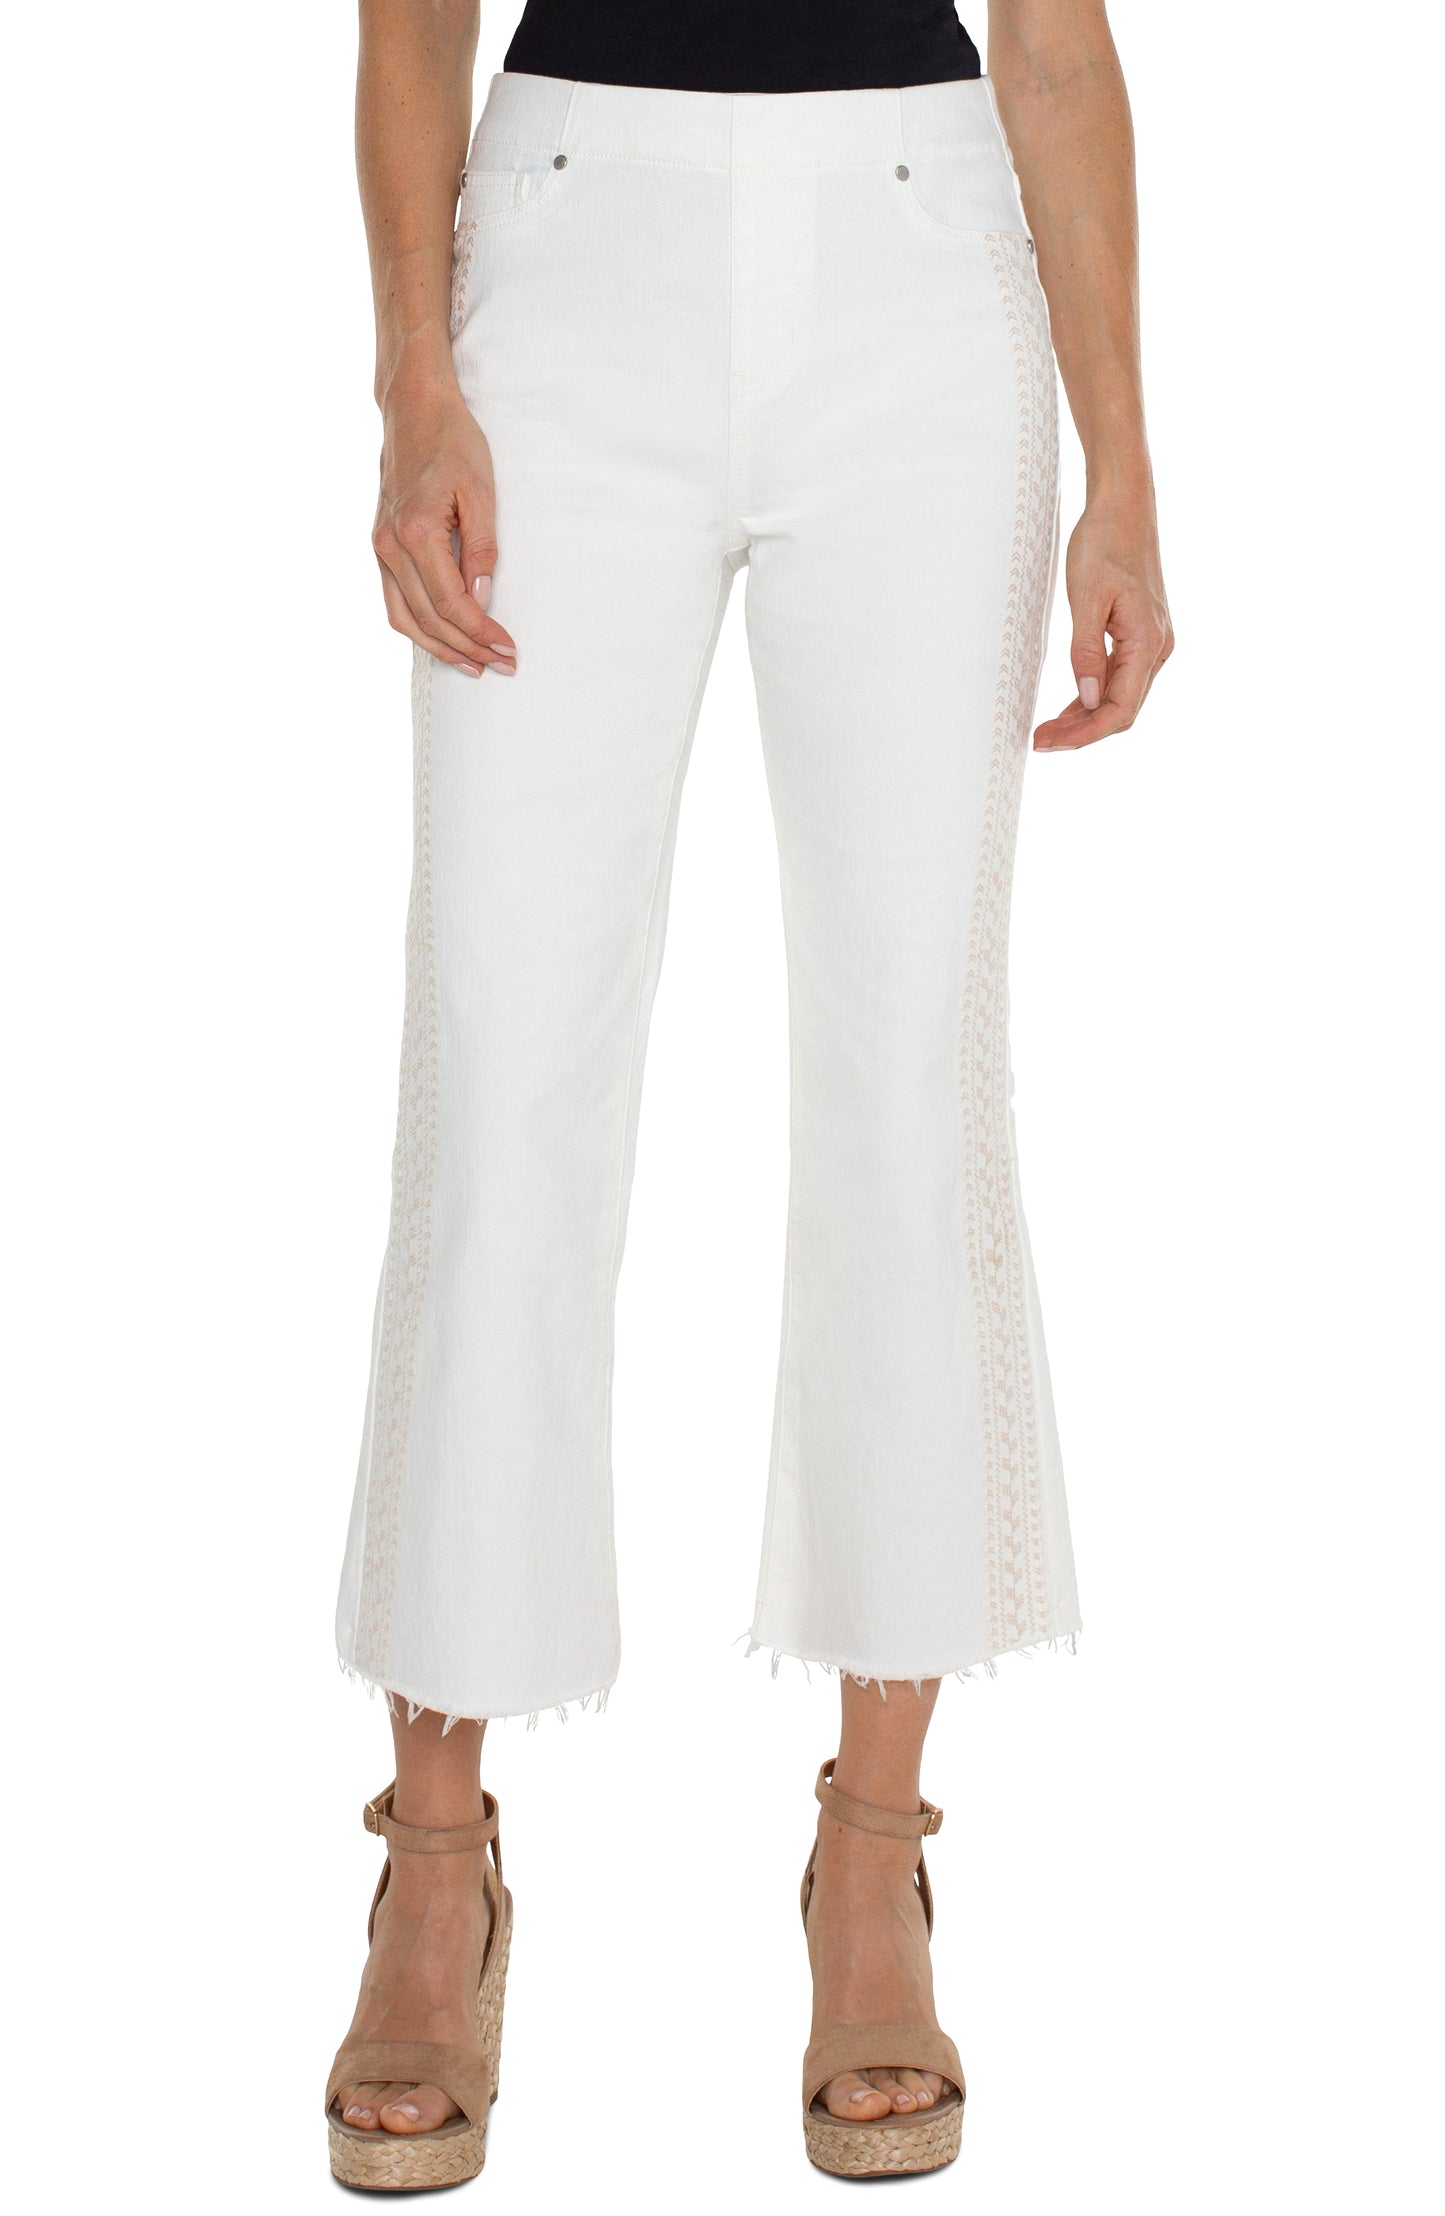 Chloe Cropped Flare Jeans with Fray Hem - Bright White